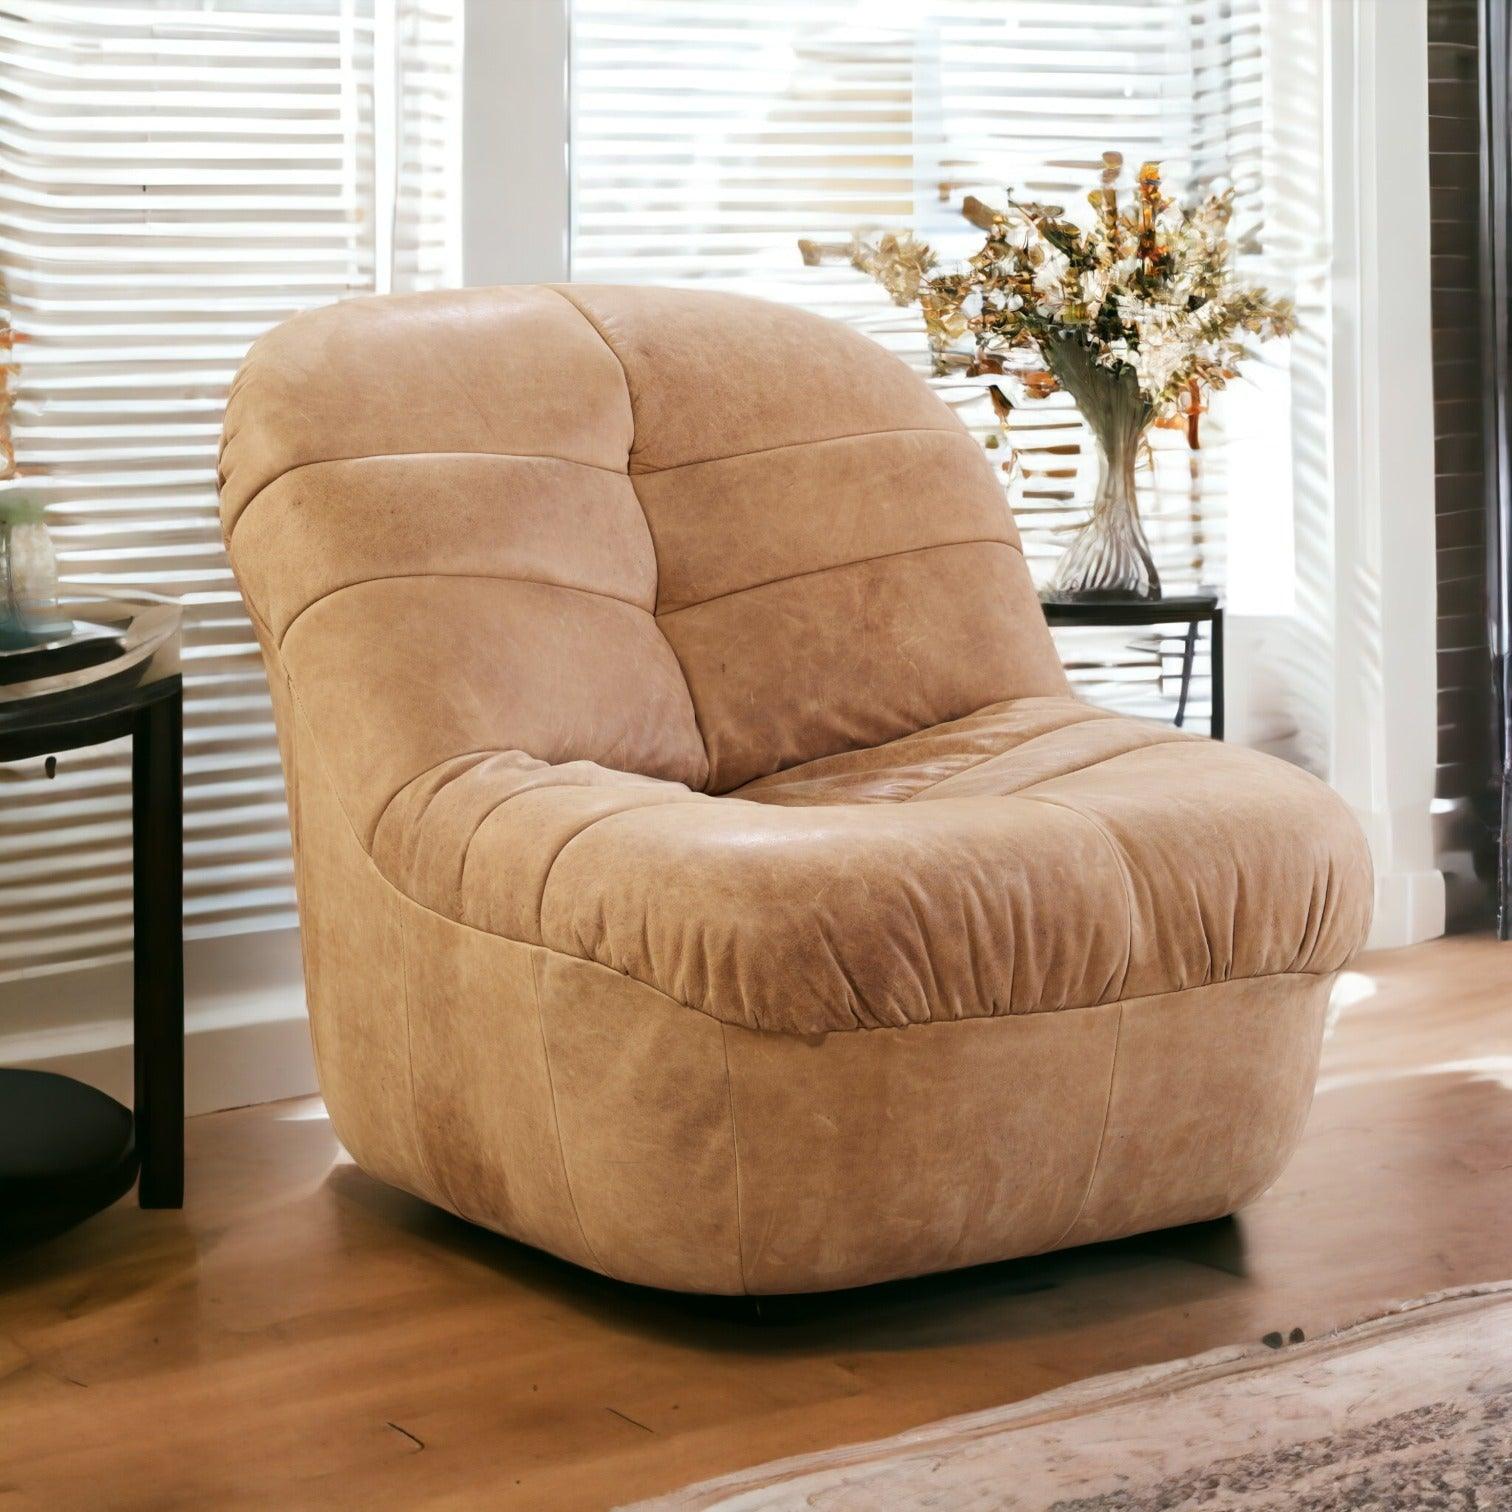 Large Comfortable Living Room Leather Chair - Uptown Sebastian